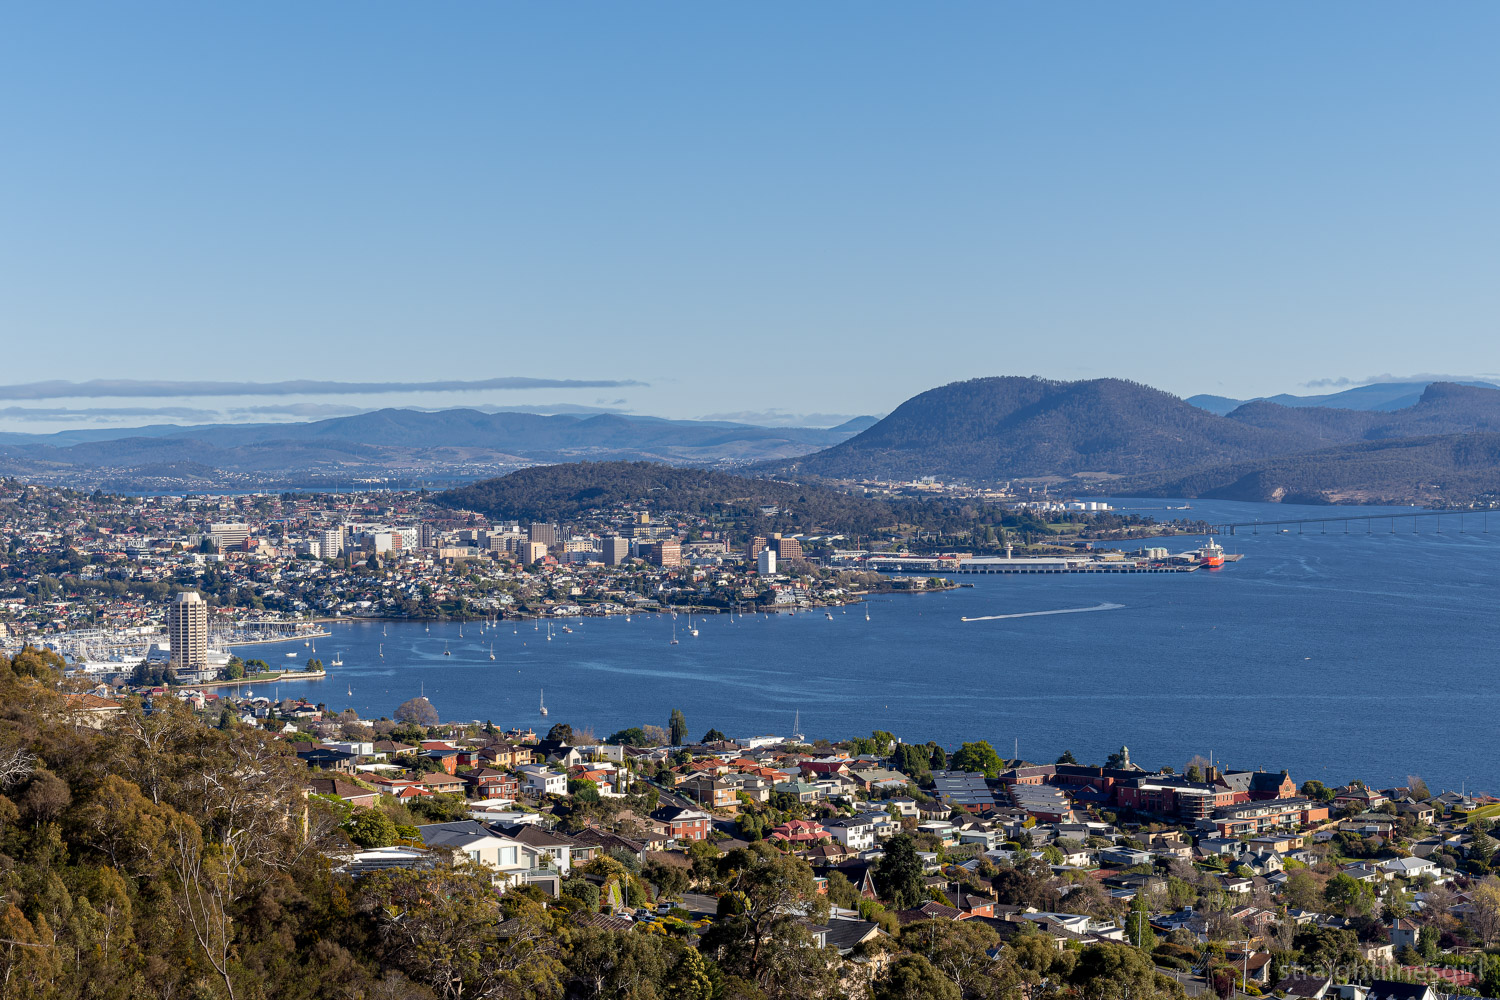 A view from a hill of a city surrounding a harbour with a large hill in the background